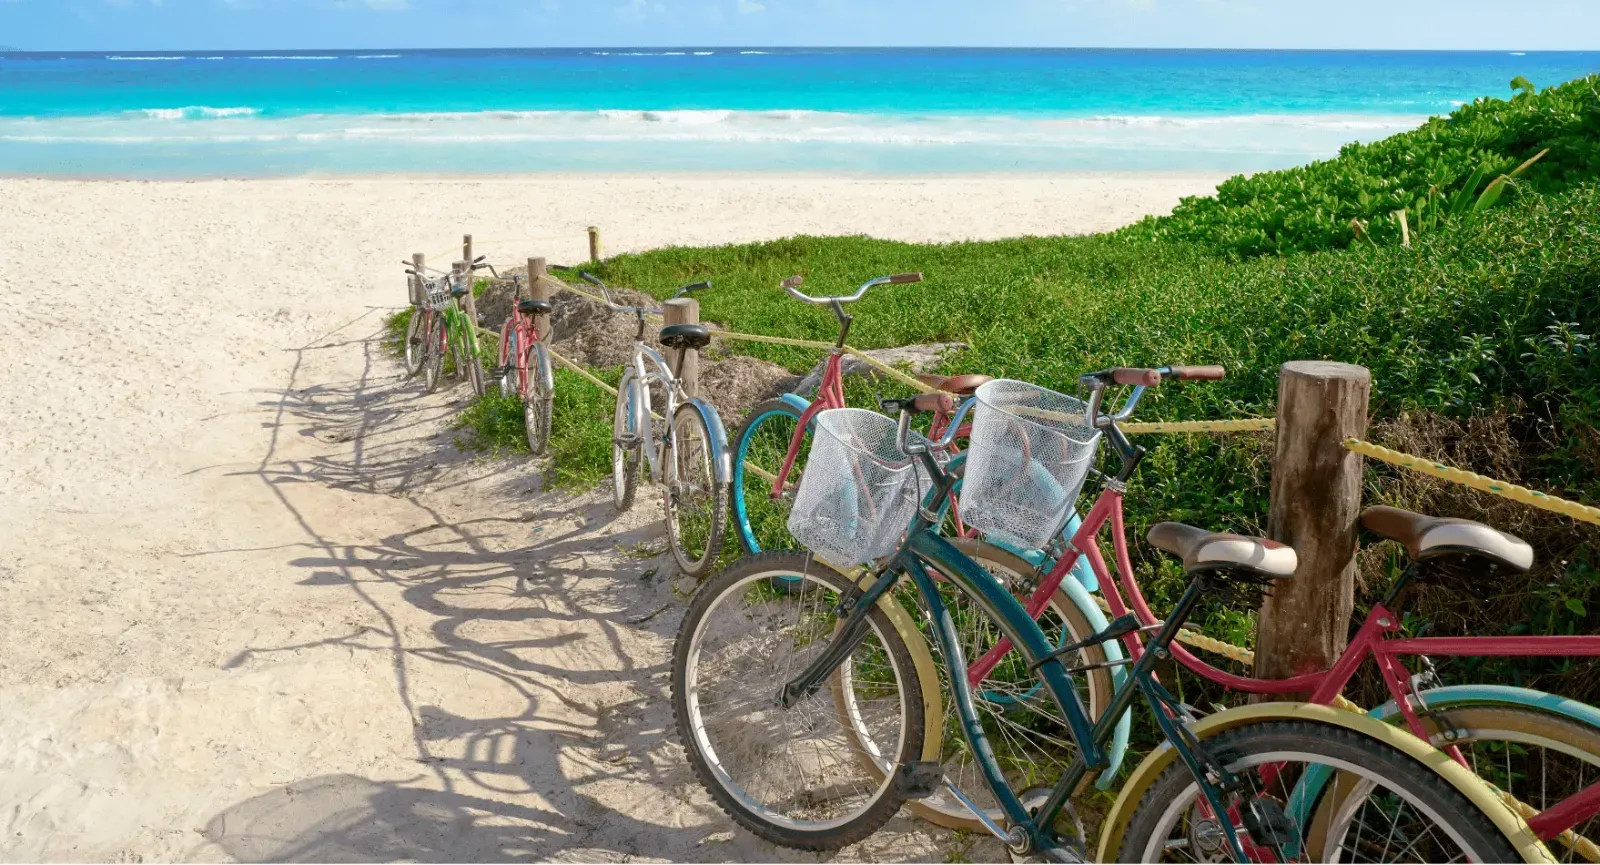 Bikes at the beach in Tulum, Mexico